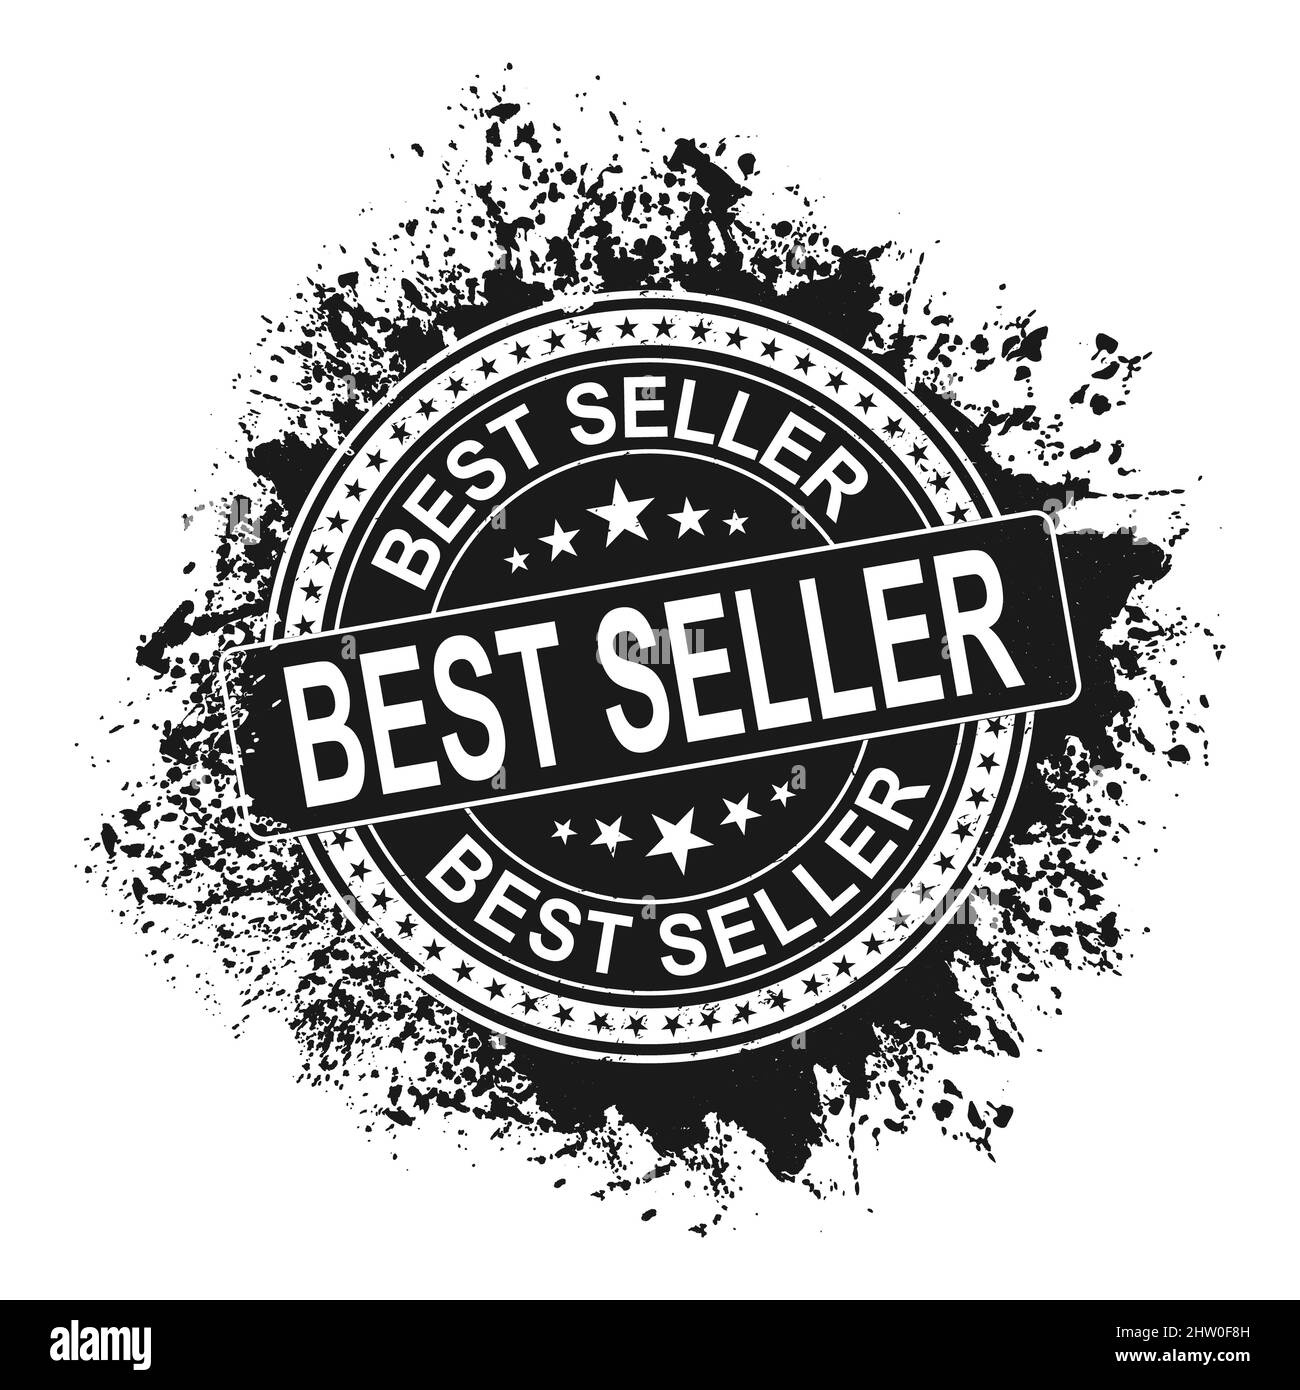 https://c8.alamy.com/comp/2HW0F8H/abstract-grungy-best-seller-rubber-stamp-sign-with-circle-shape-illustration-best-seller-text-seal-mark-label-design-template-2HW0F8H.jpg